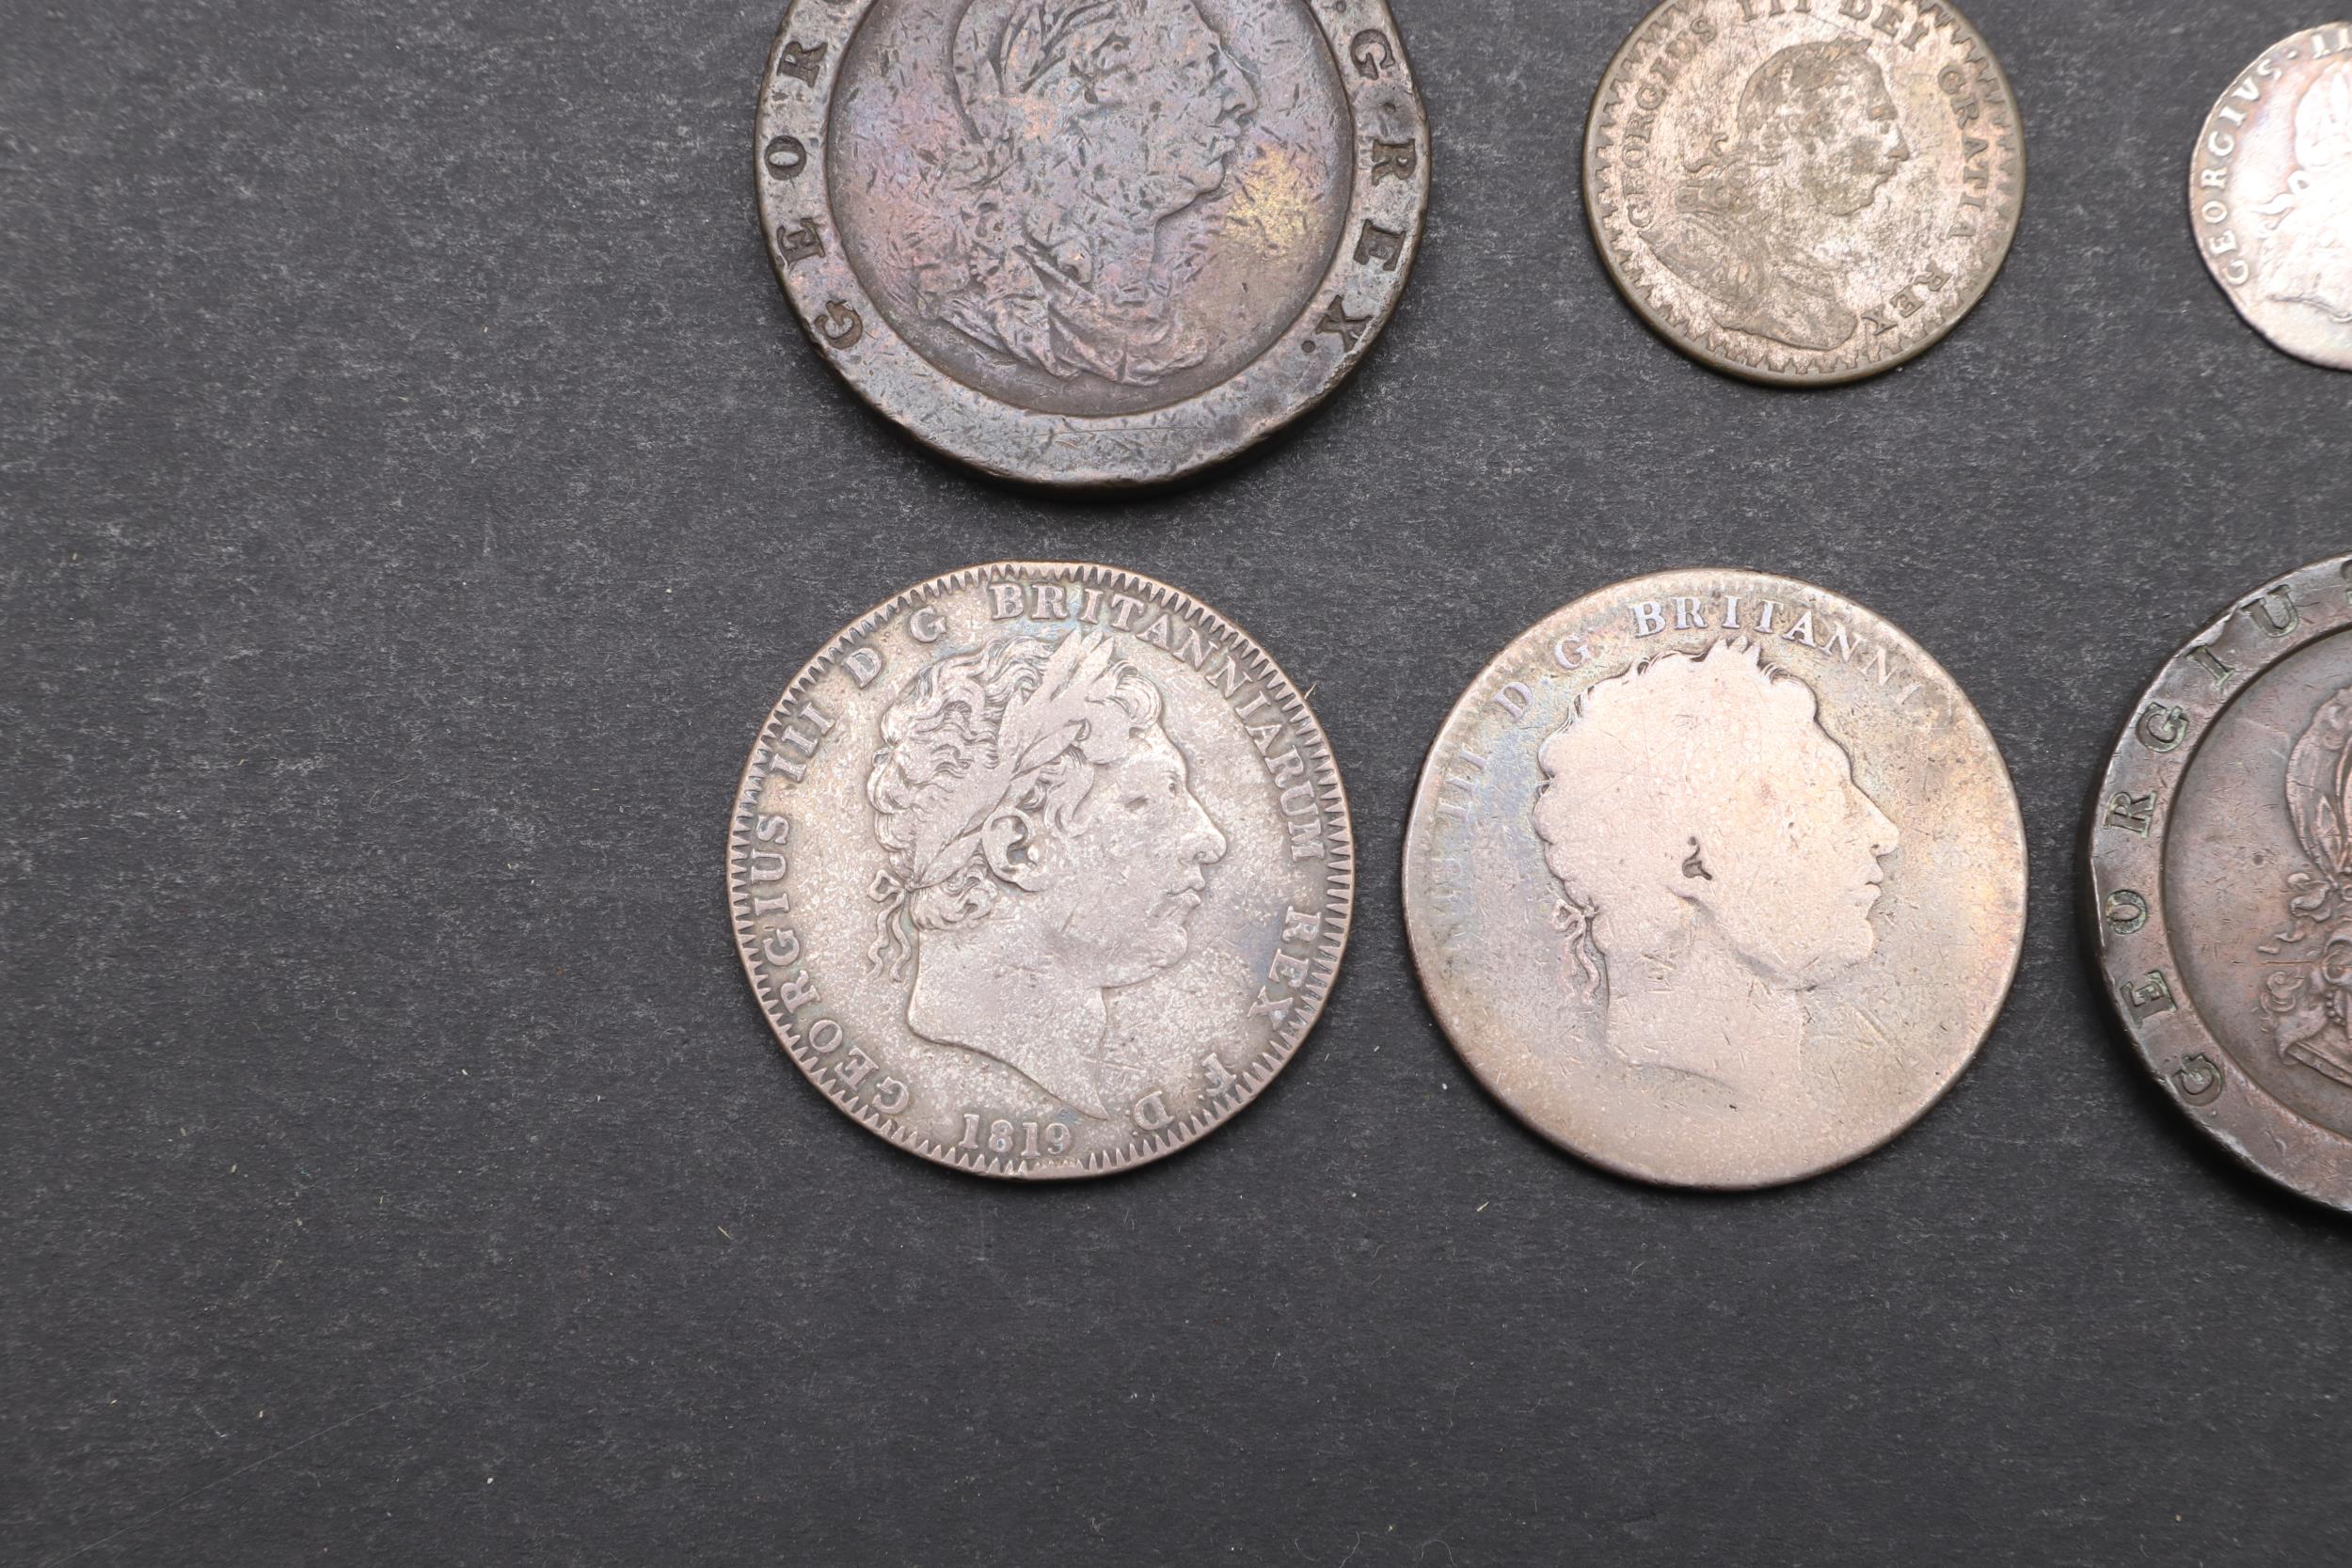 A GEORGE III CROWN AND A SMALL COLLECTION OF SIMILAR COINS. - Image 4 of 7